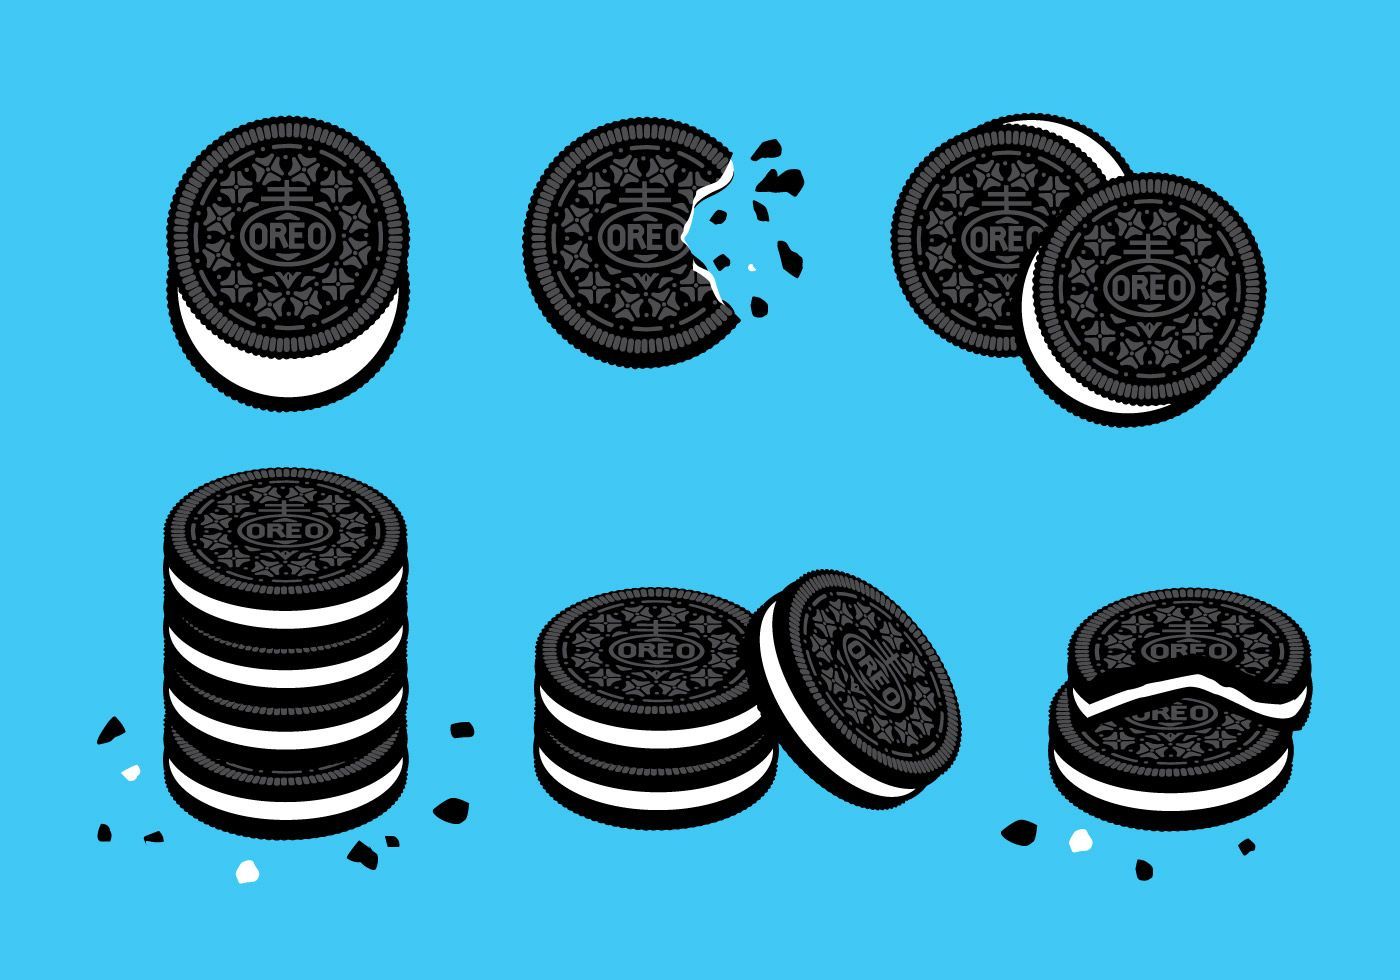 Awesome free oreo cookie clipart. Cookie vector, Oreo, Oreo cookies